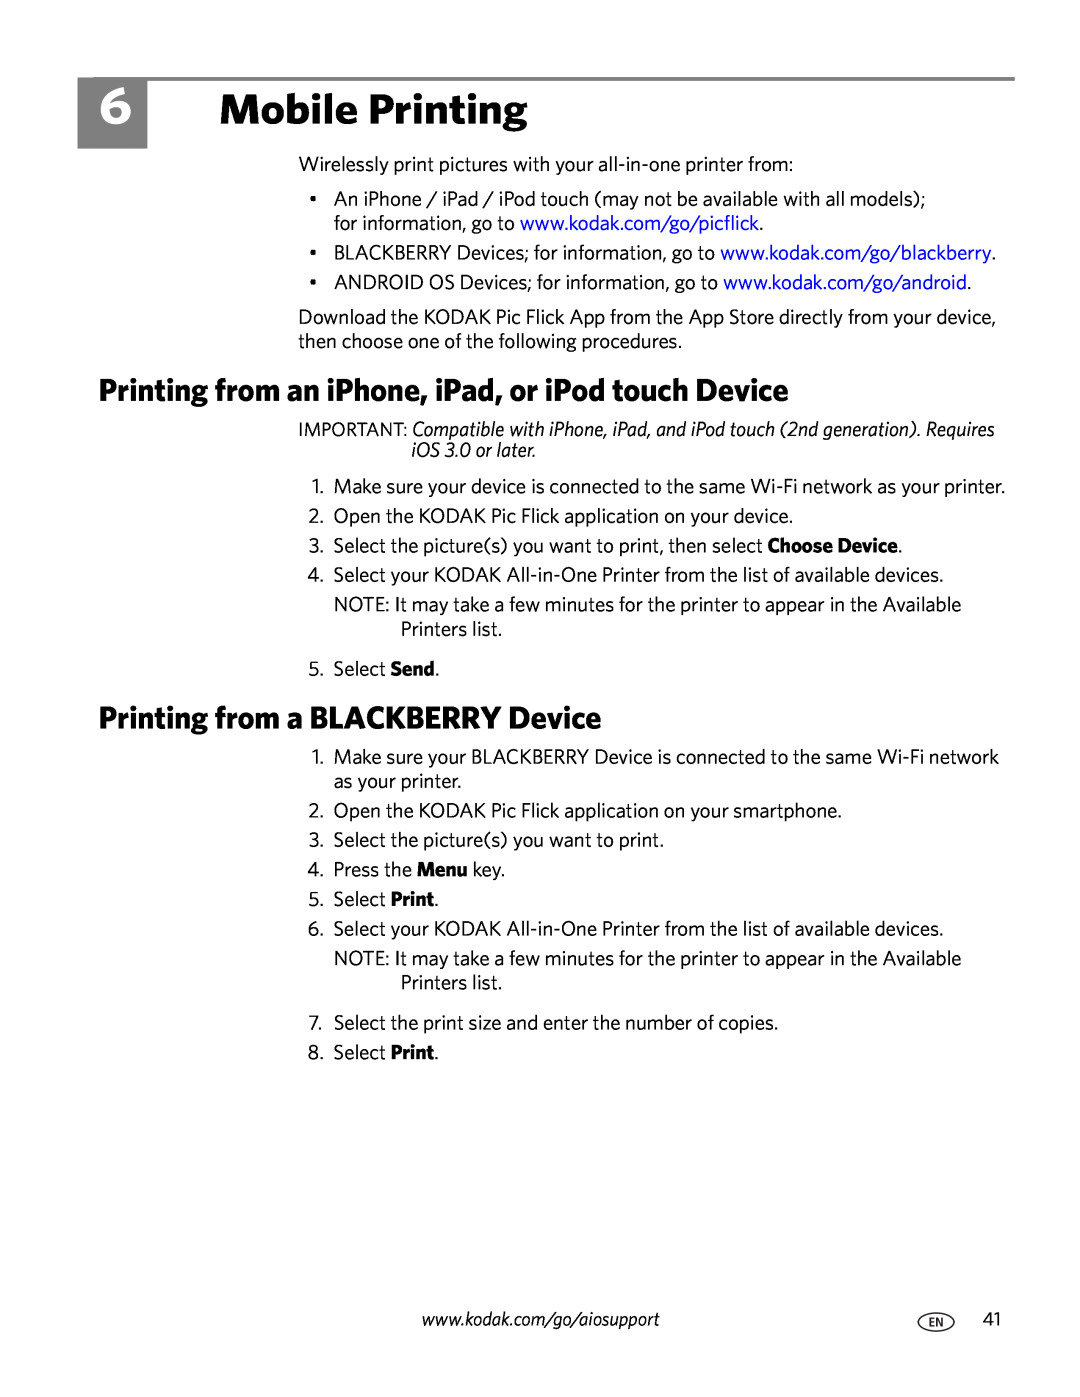 Kodak 3.1 manual Mobile Printing, Printing from an iPhone, iPad, or iPod touch Device, Printing from a BLACKBERRY Device 